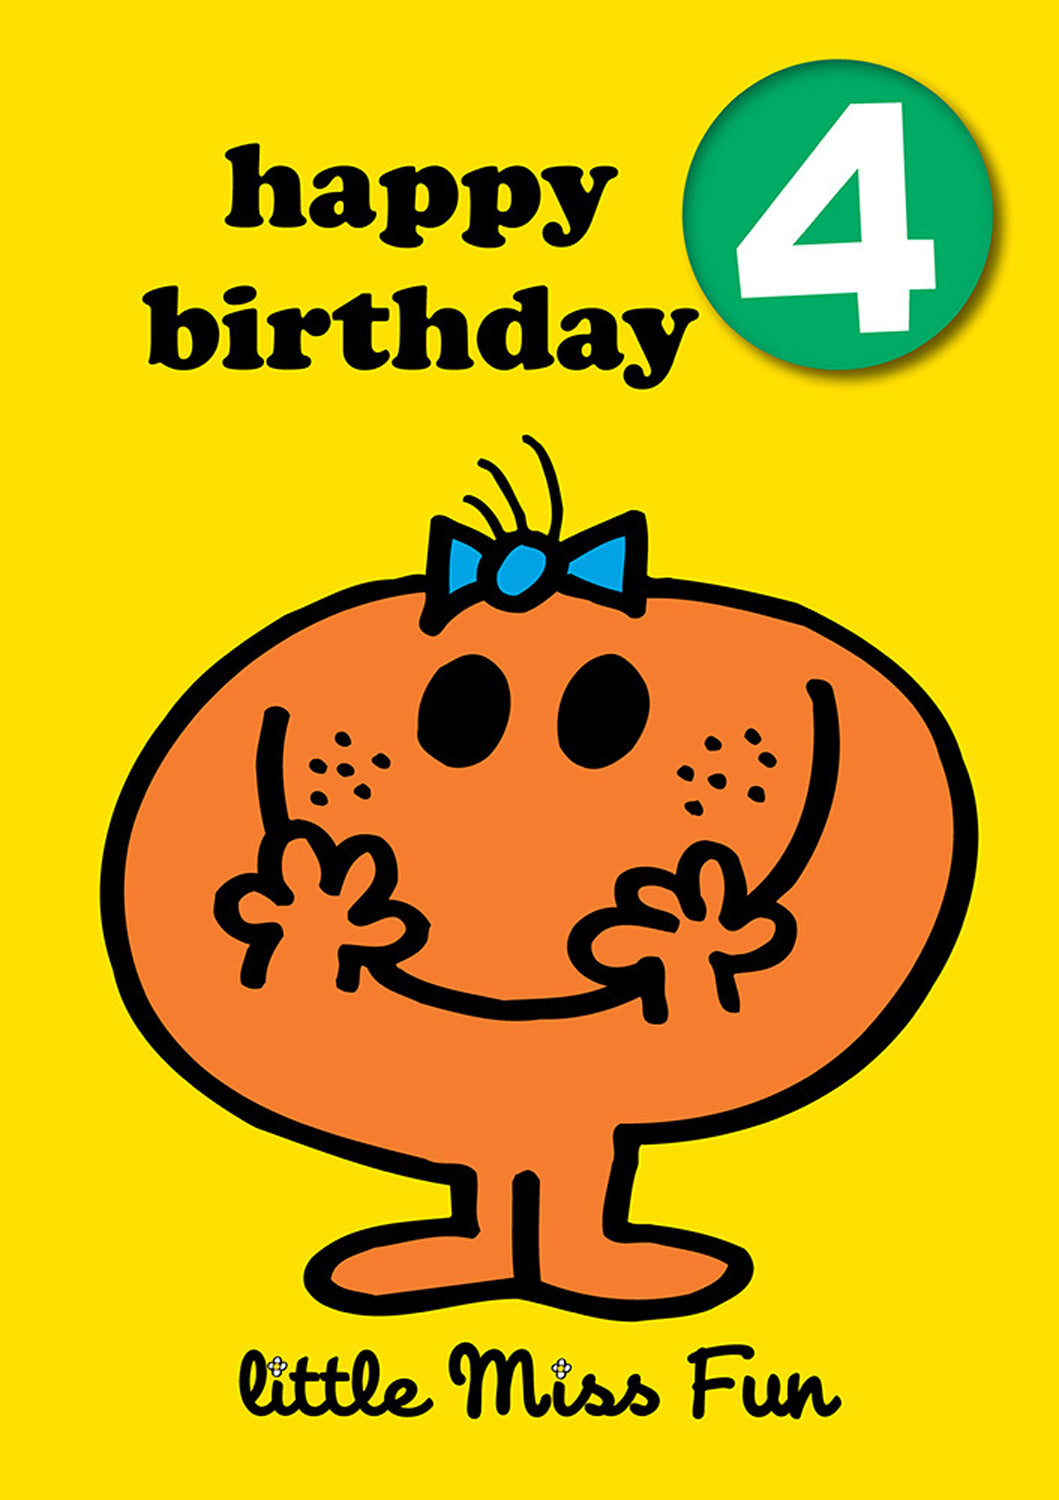 Greeting Card: Mr. Men and Little Miss - Little Miss Fun Age 4 Badge